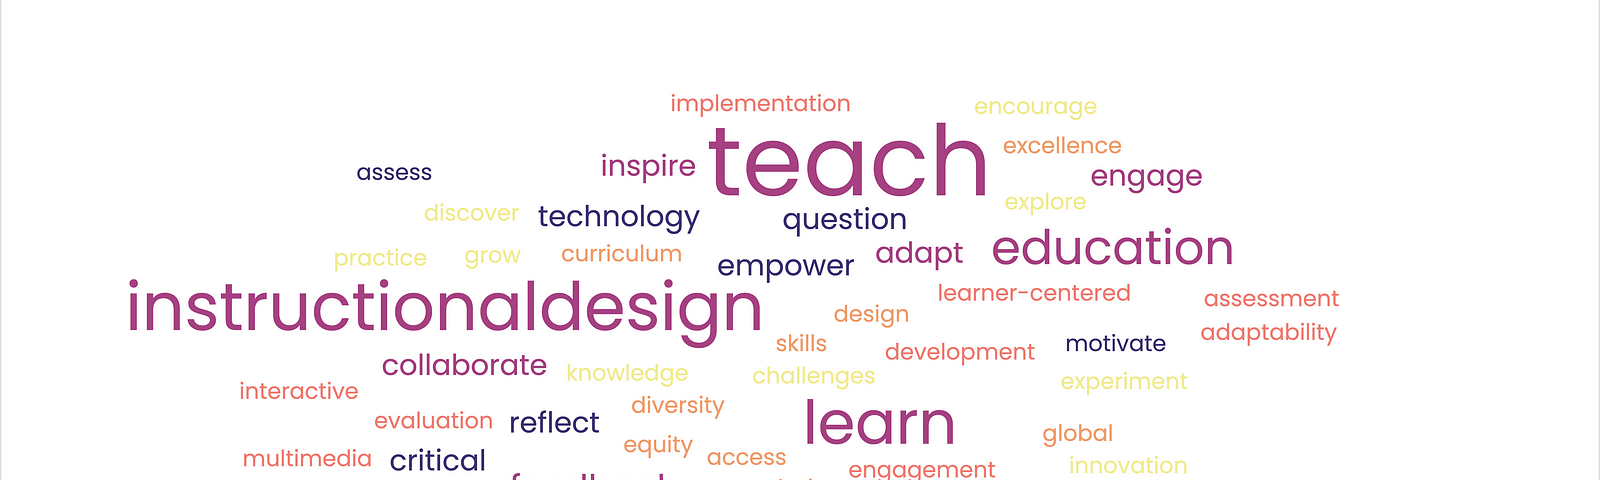 A word cloud showing the word teach as the prominent word with all other words around it relating to teaching, education, learning and instructional design.